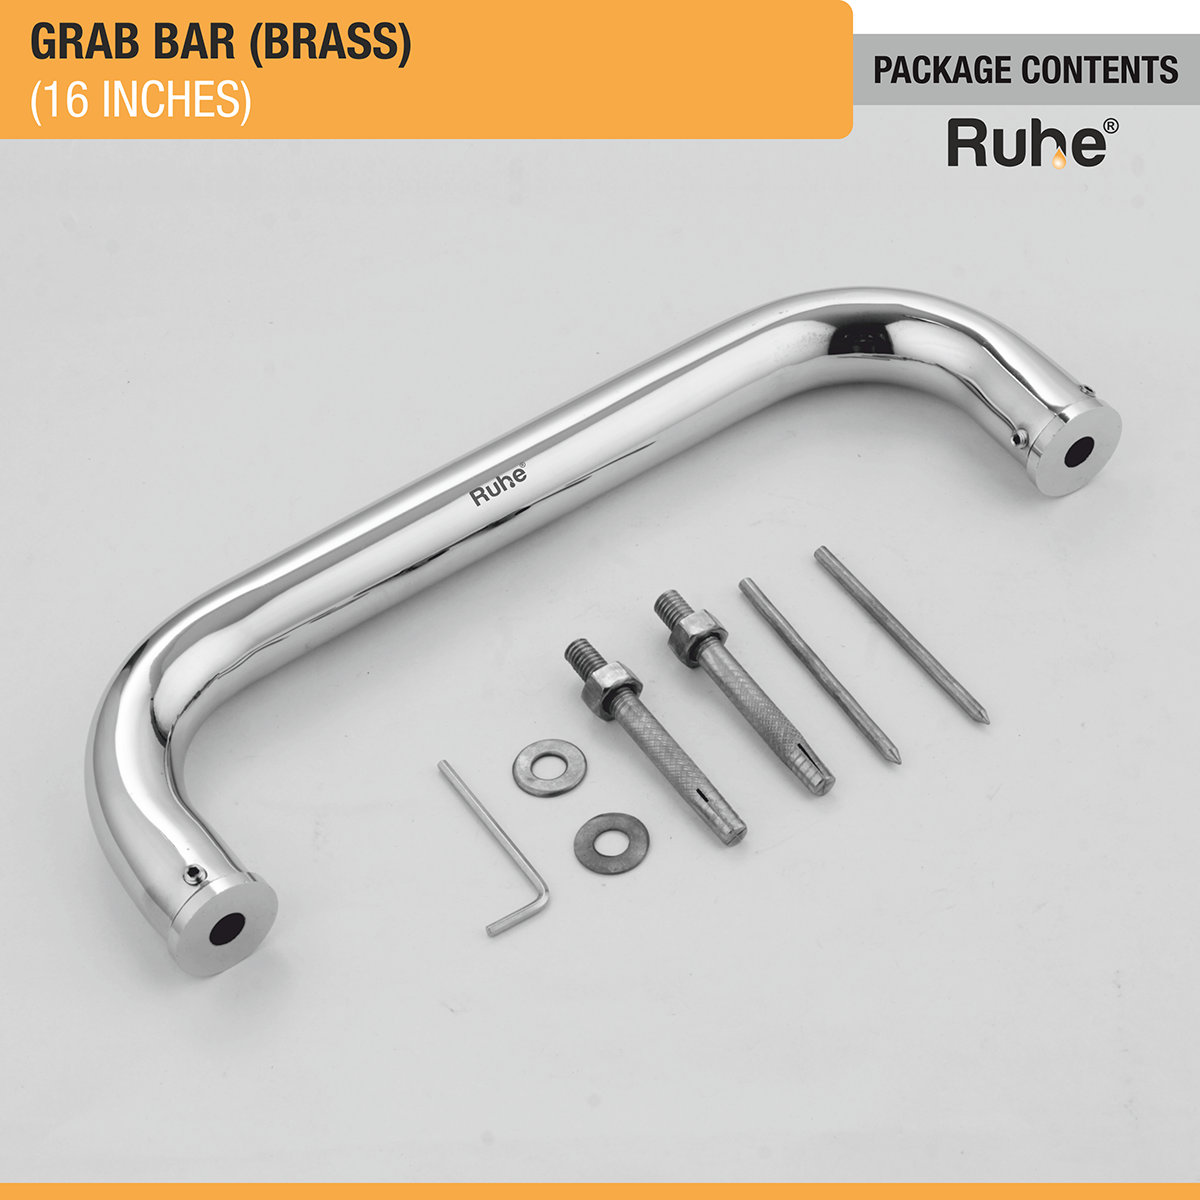 Brass Grab Bar (16 inches) package content